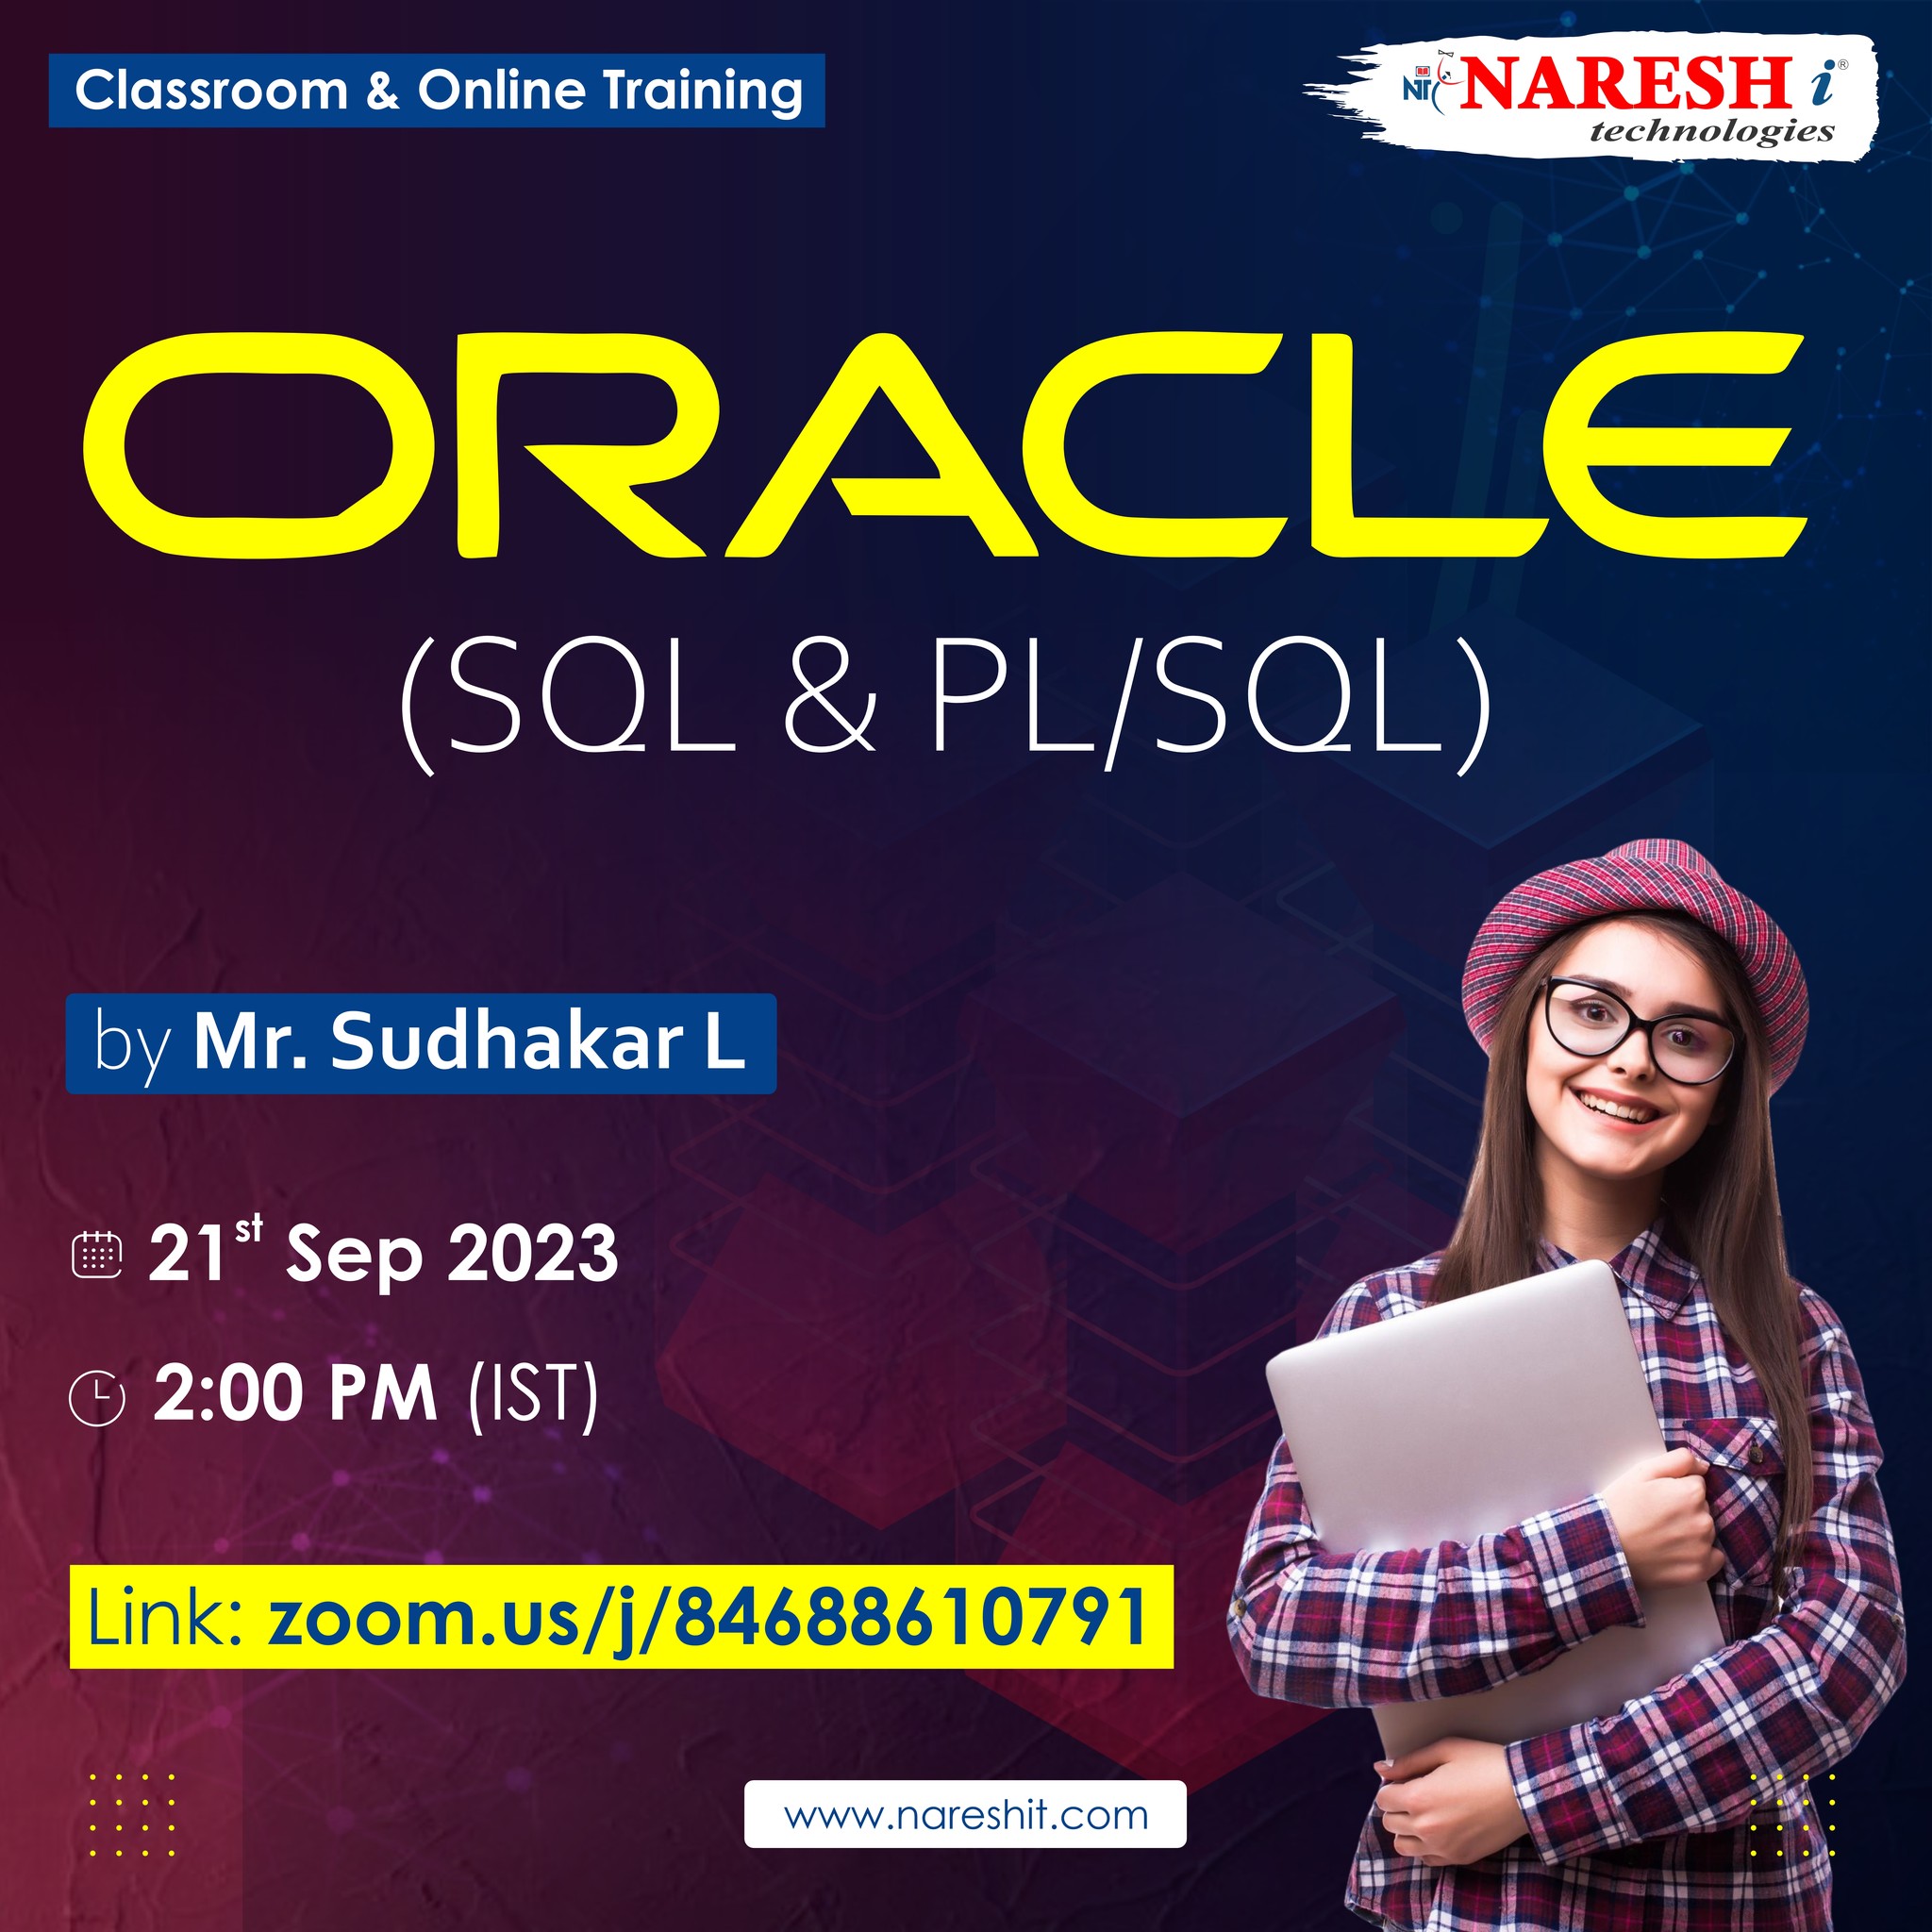 Free Demo On Oracle - Naresh IT,Hyderabad,Educational & Institute,Free Classifieds,Post Free Ads,77traders.com